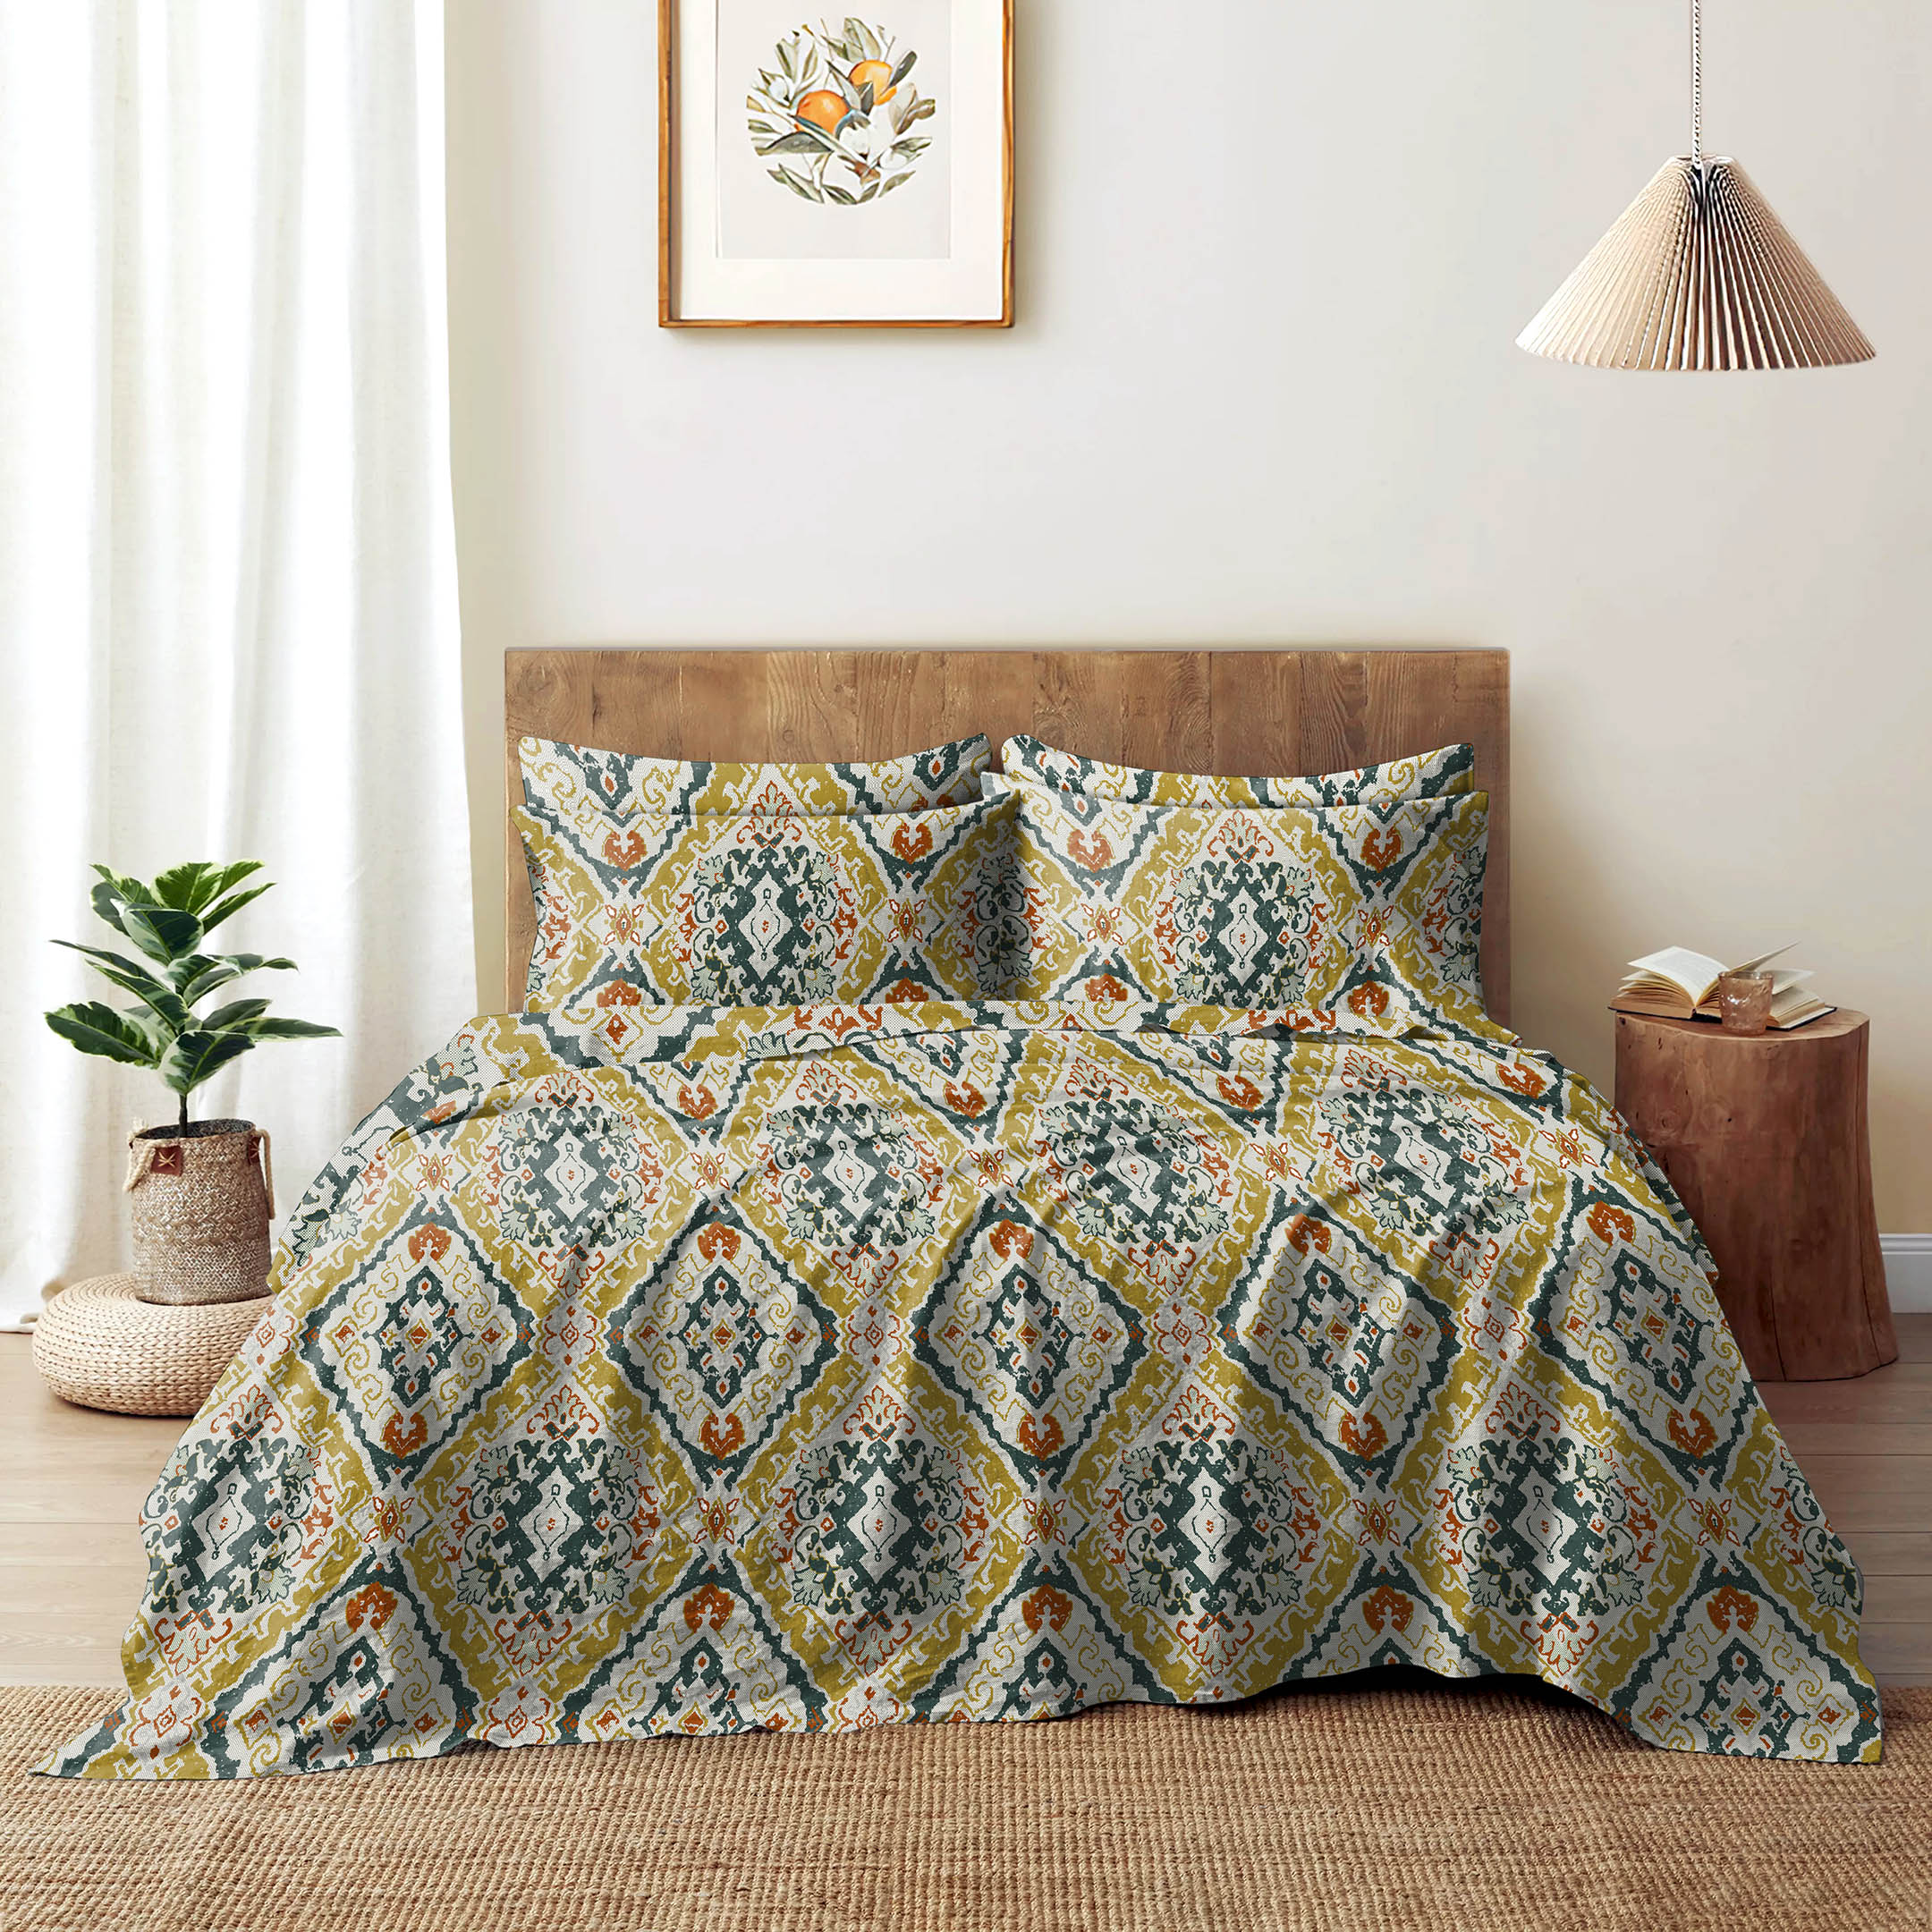 Morocco Luxury Bed Sheets & Curtains